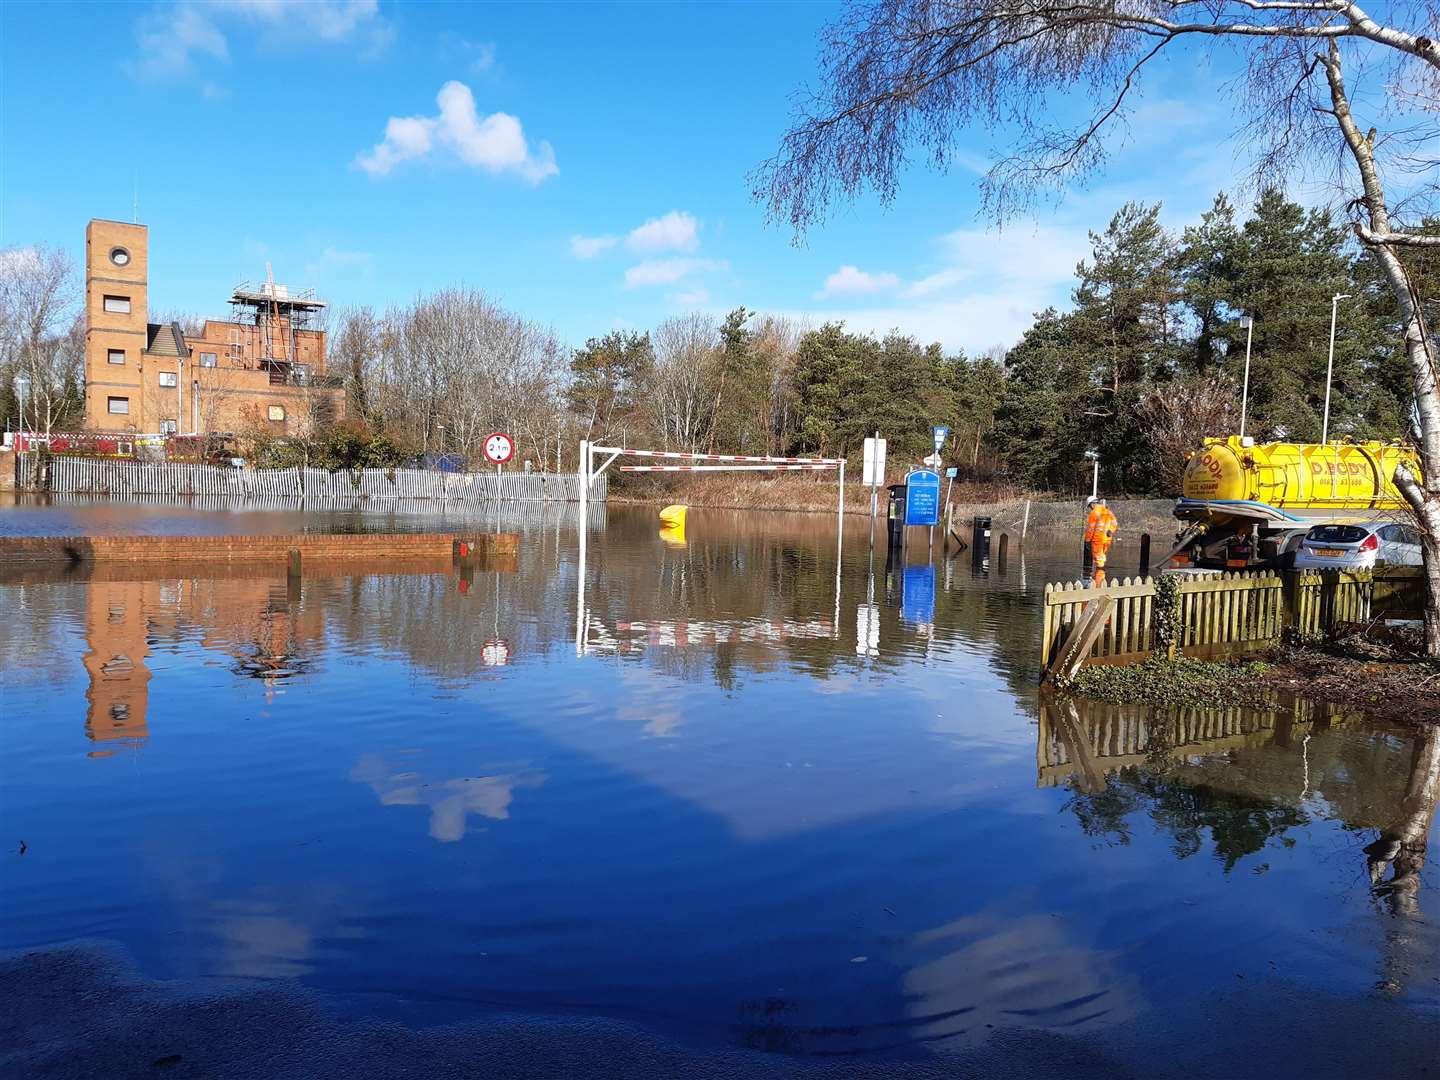 The Henwood car park, owned by Ashford Borough Council, when it was flooded in March 2020